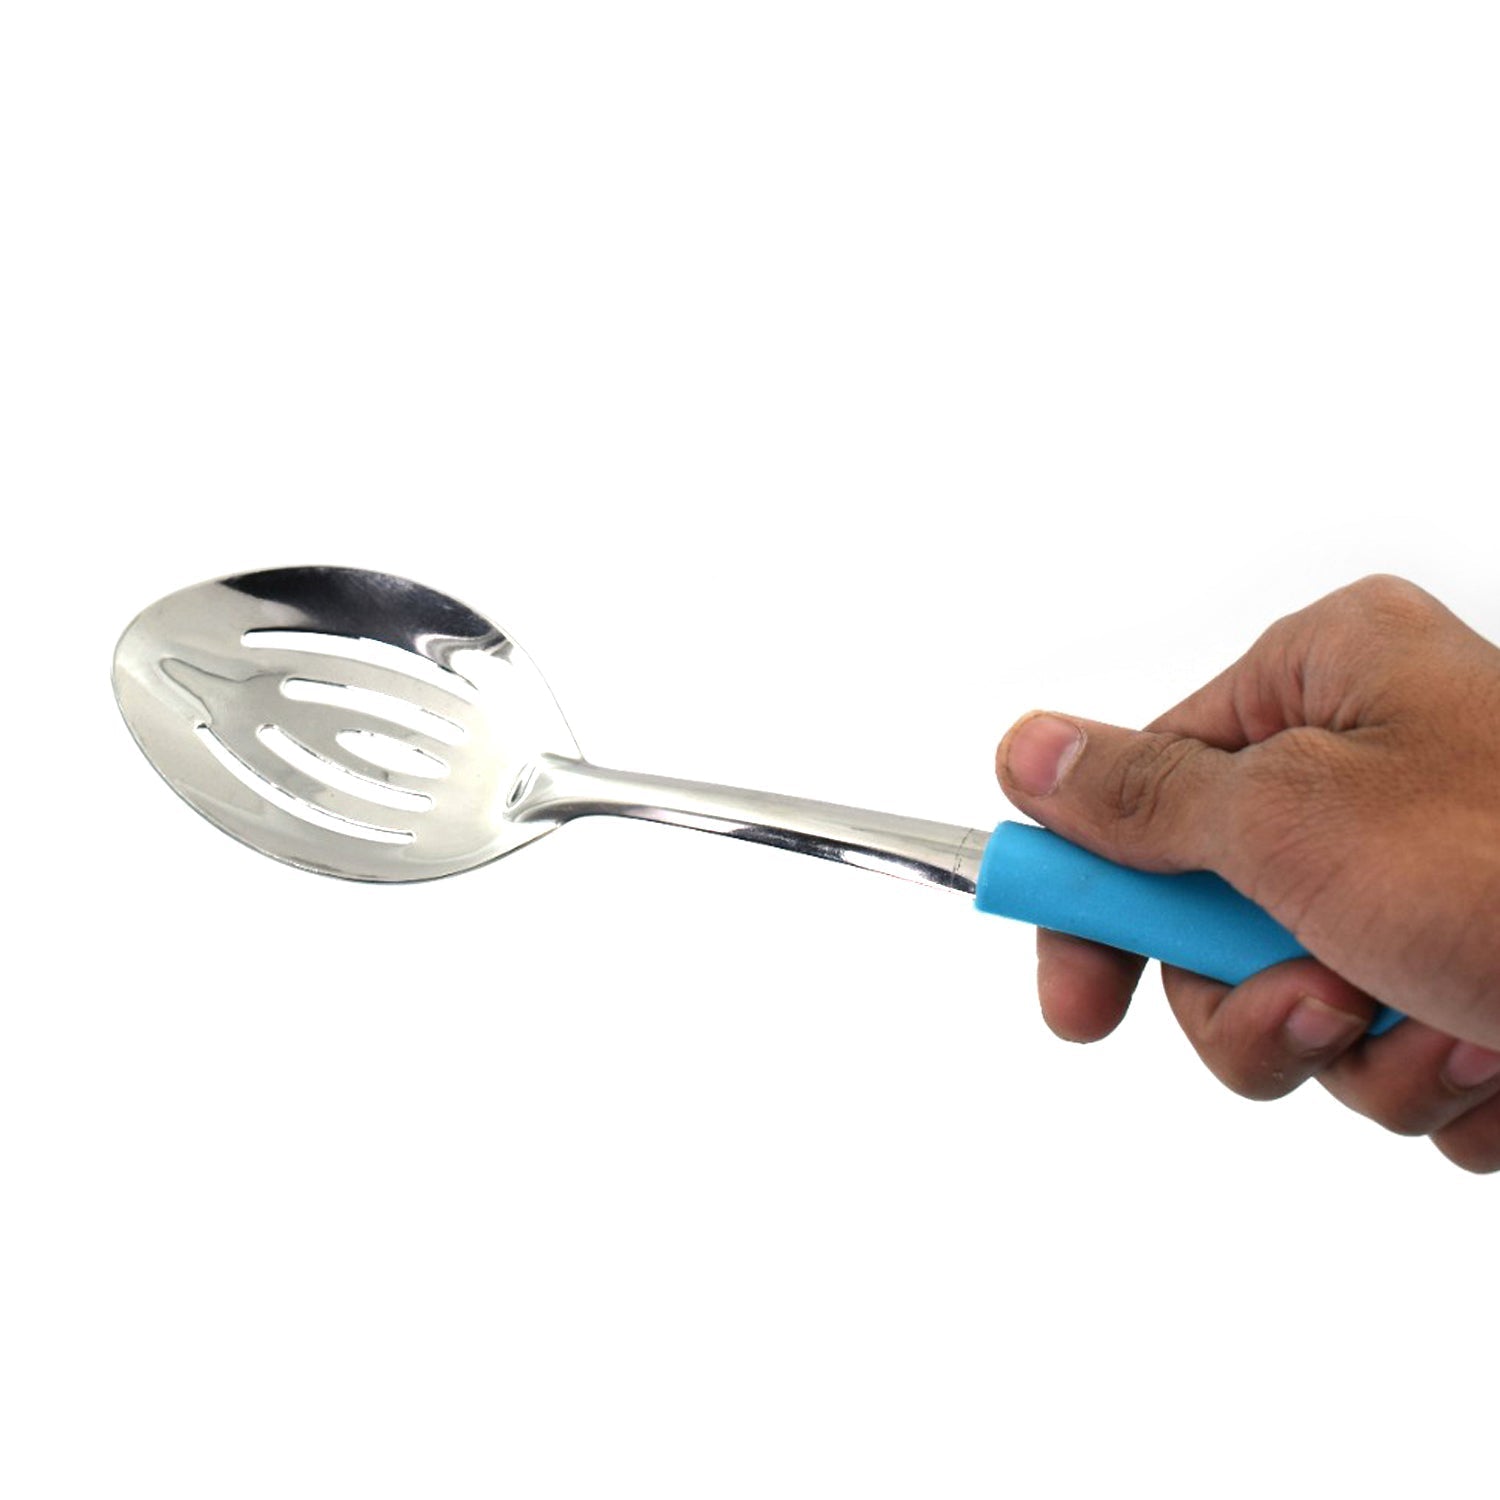 7040 SS Frying Spoon for serving and having food stuffs and items which needs to be fried and crispy.